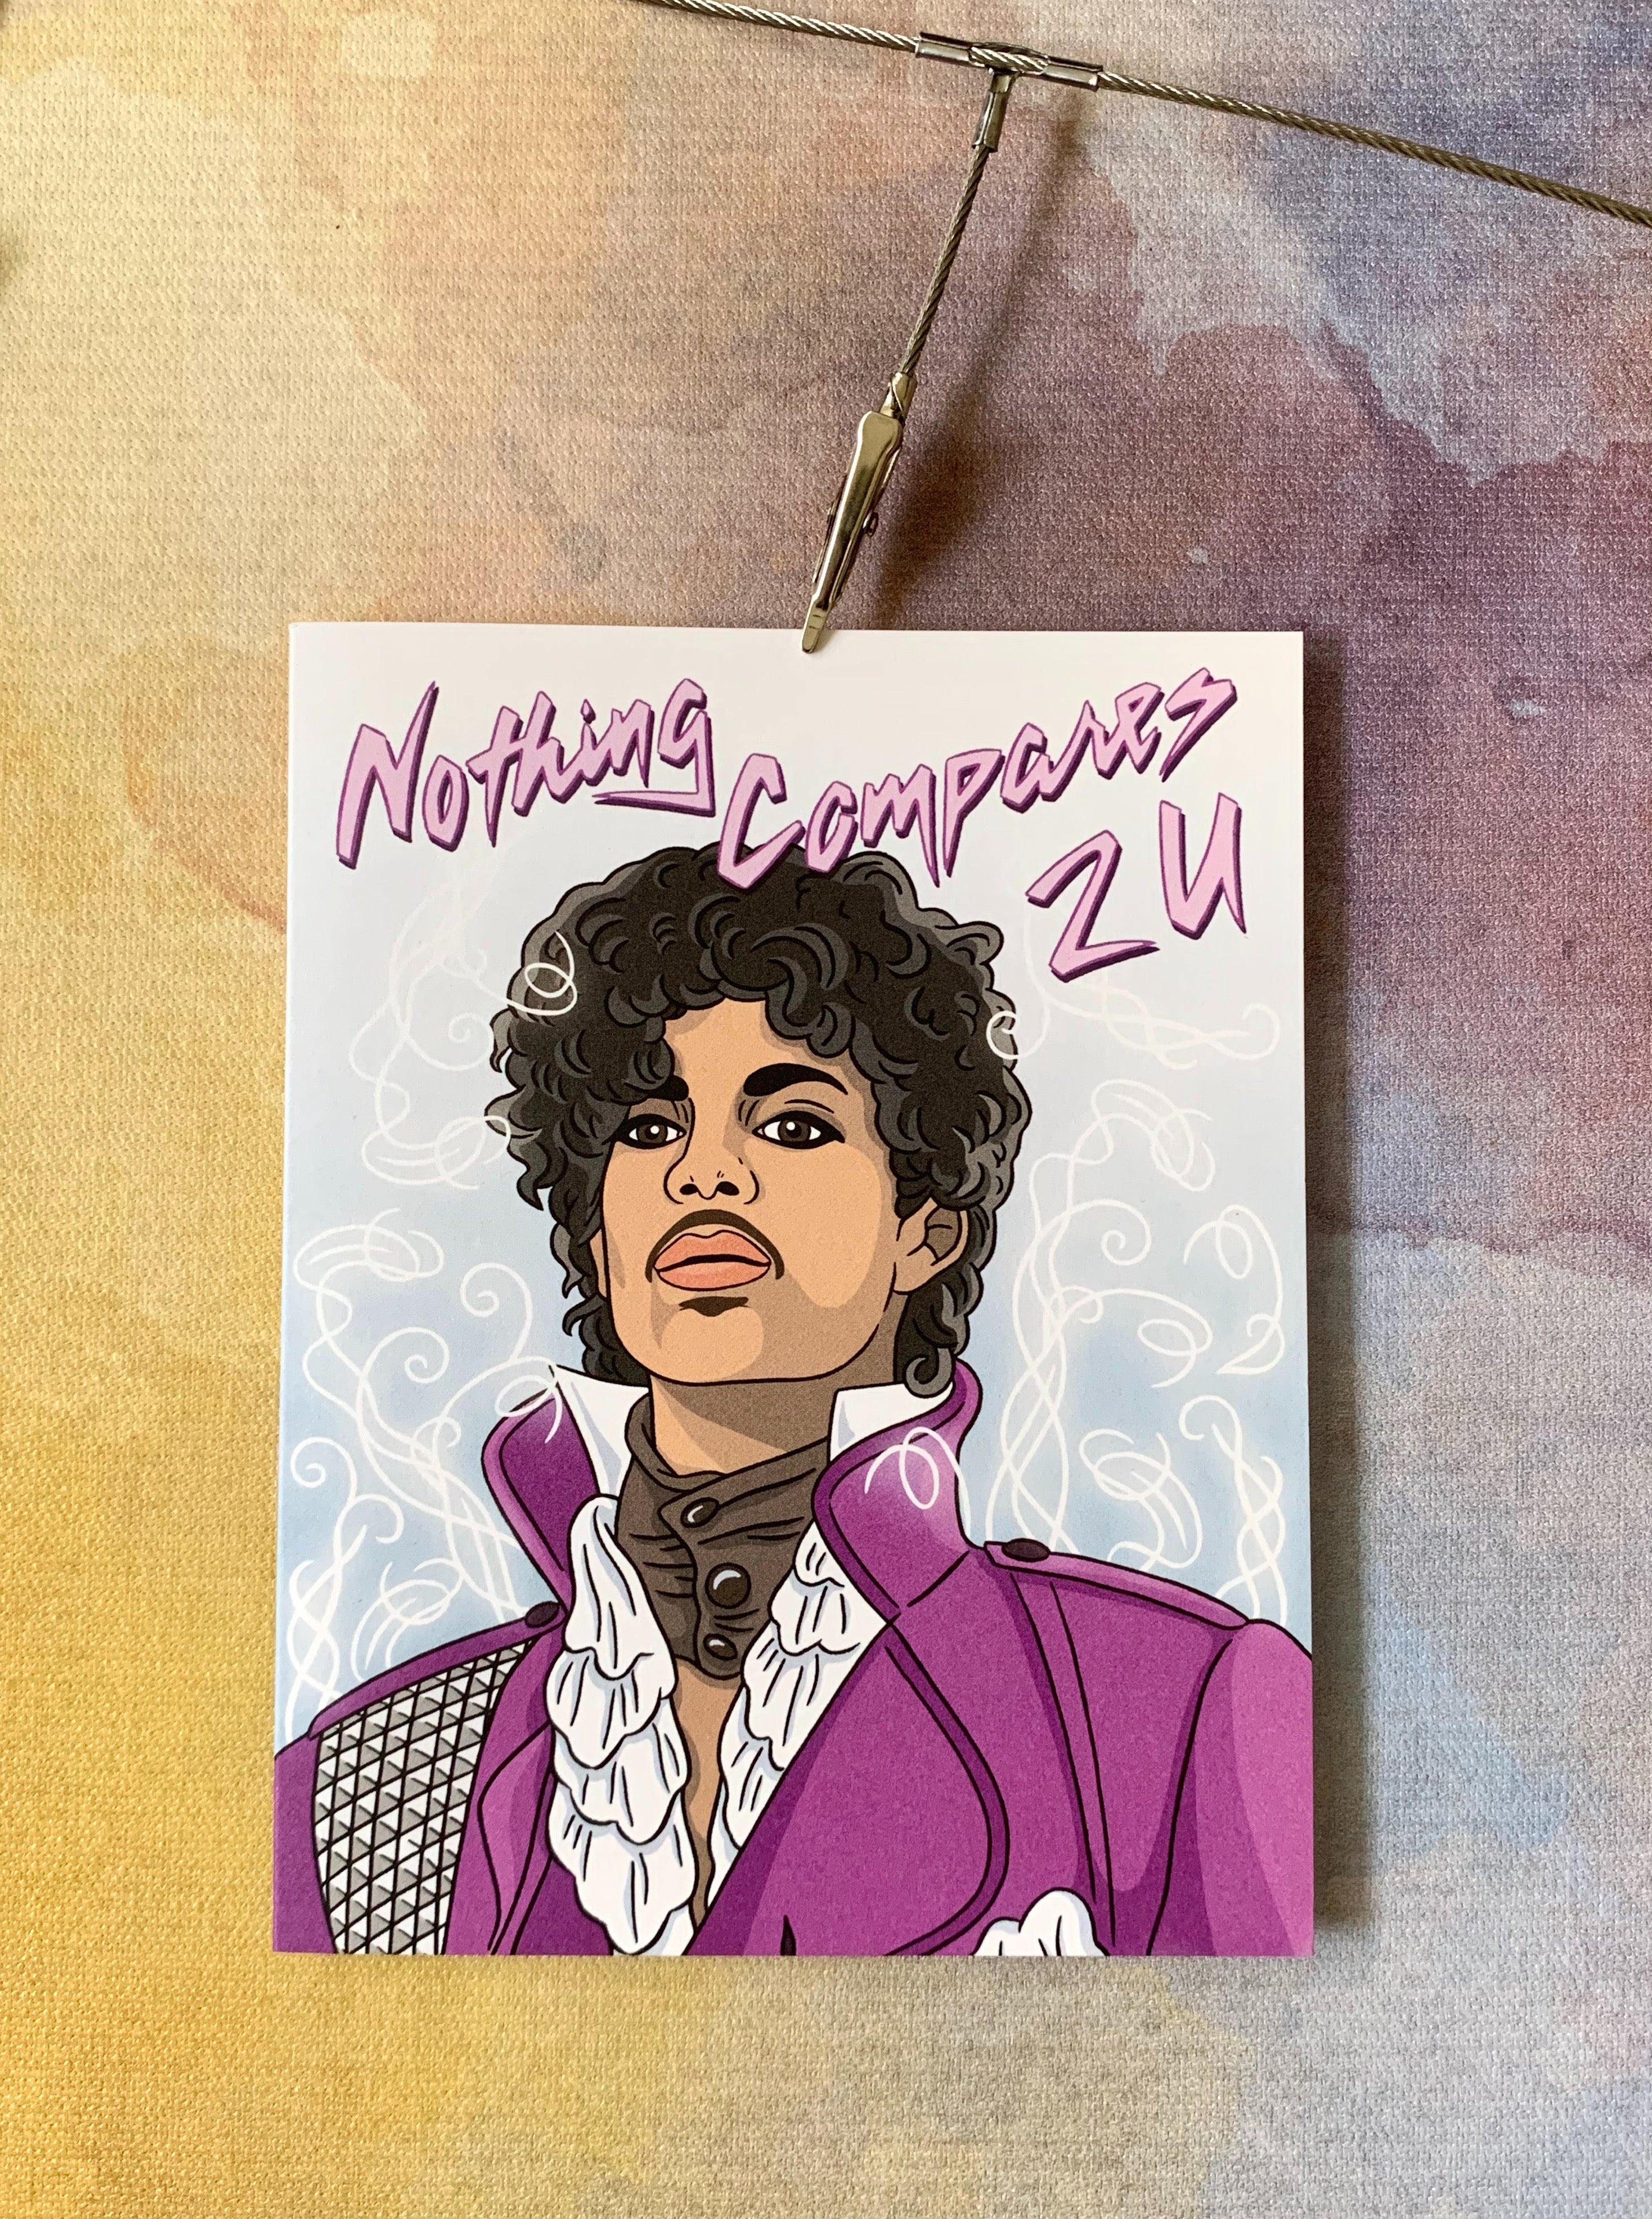 Prince "Nothing Compares 2 U" Greeting Card